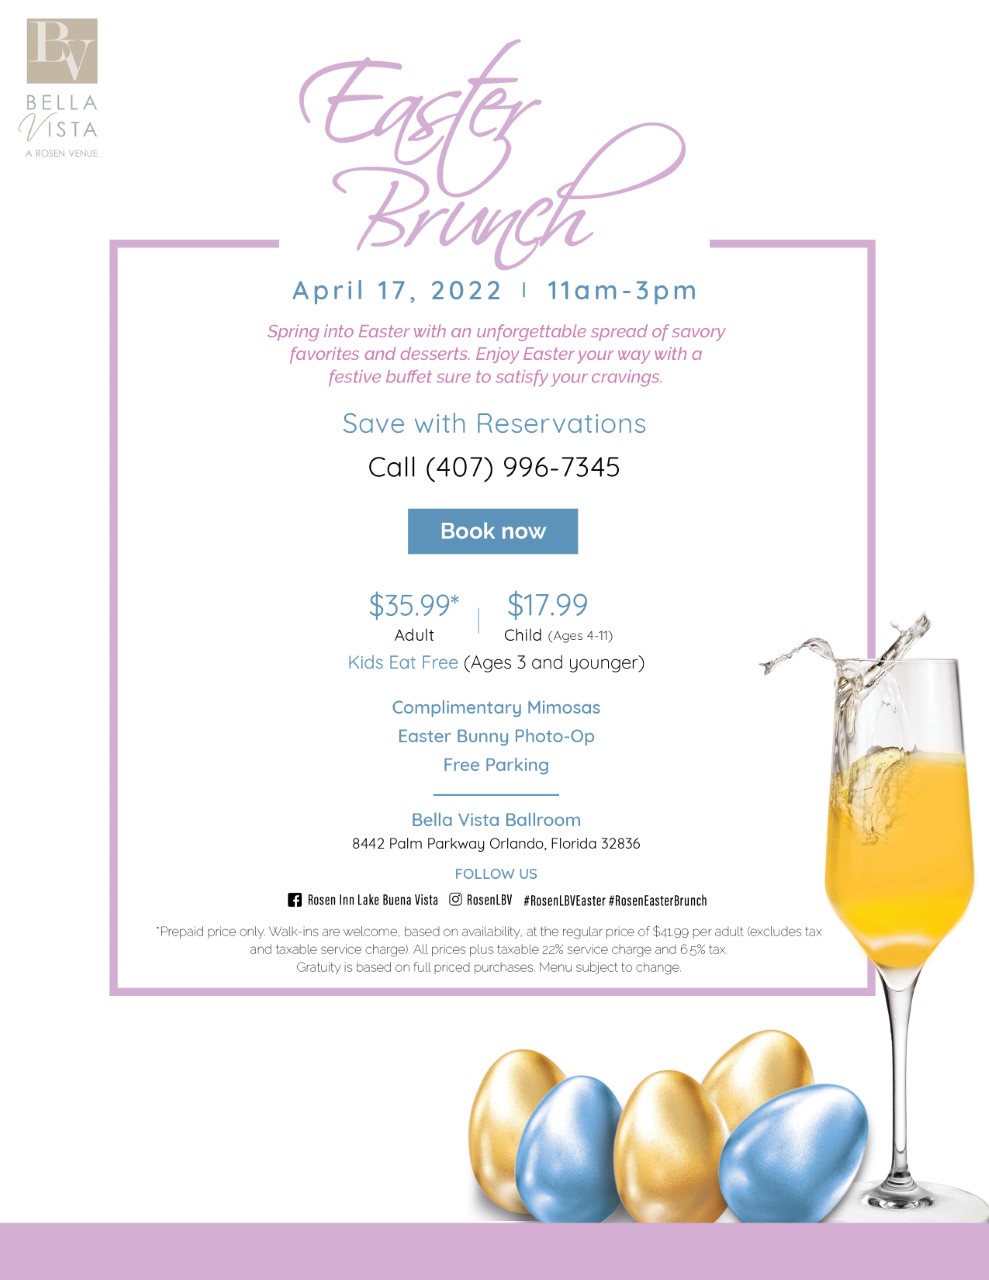 April 17, 2022 | 11am - 3pm
		  
		  
		  Spring into Easter with an unforgettable spread of savory favorites and desserts. Enjoy Easter your way with a festive buffet sure to satisfy your cravings.
		  
		  Save with Reservations. Call (407) 996-7345
		  
		  $35.99* Adult
		  $17.99 Child (Ages 4-11)
		  
		  Kids Eat Free (Ages 3 and younger)
		  
		  Complimentary Mimosas
		  Easter Bunny Photo-Op
		  Free Parking
		  
		  Bella Vista Ballroom
		  8442 Palm Parkway Orlando, Florida 32836
		  
		  Prepaid price only. Walk-ins welcome. Based on availability, at the regular price of $41.99 per adult (excludes tax and taxable service charge). All prices plus taxable 22% service charge and 6.5% tax. Gratuity is based on full priced purchases. Menu subject to change.